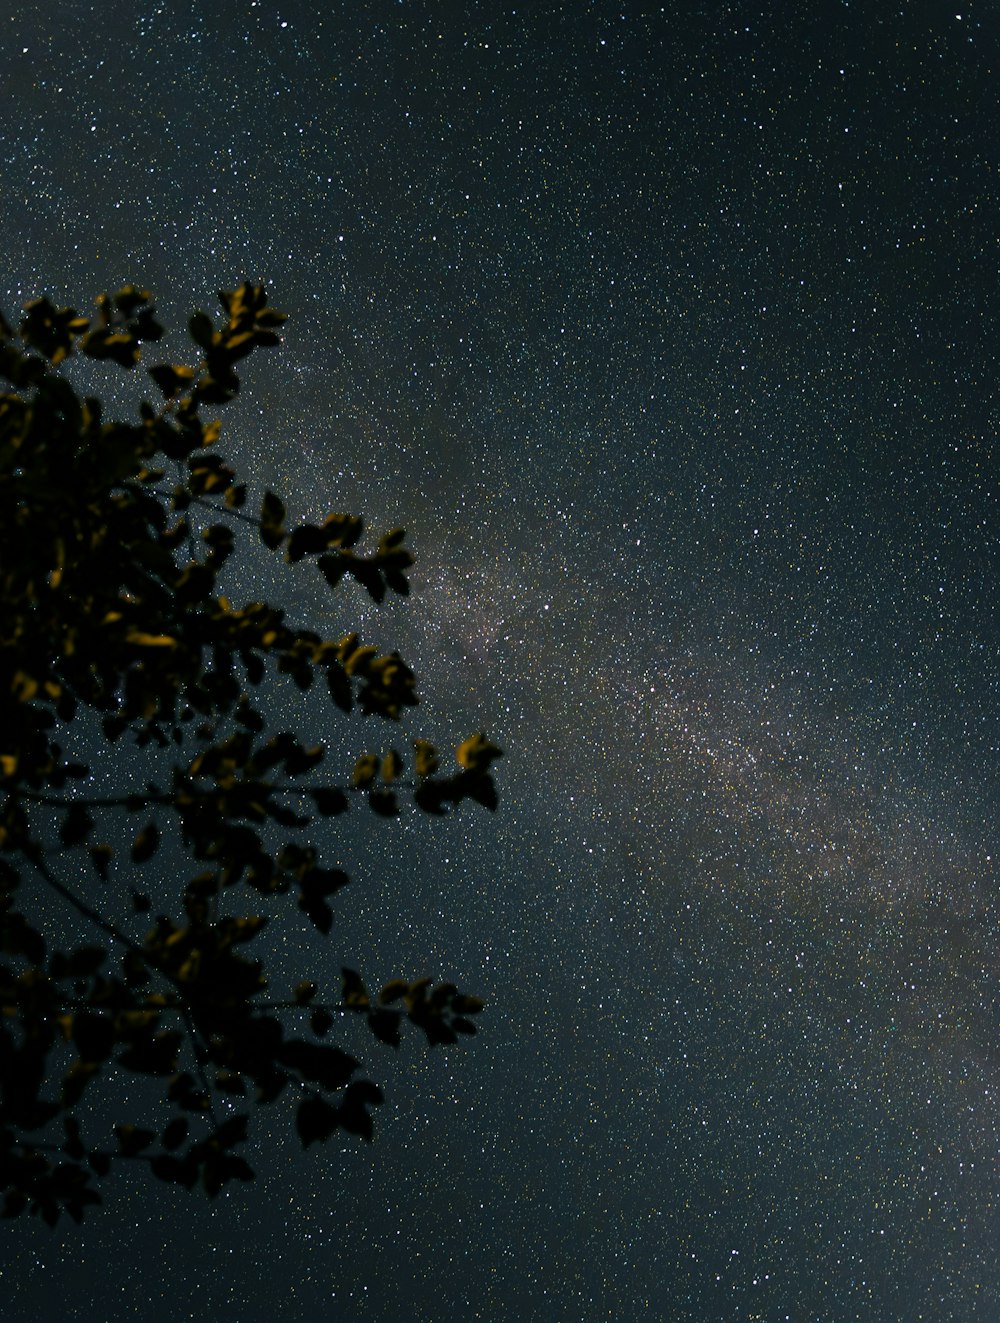 the night sky with stars and trees in the foreground